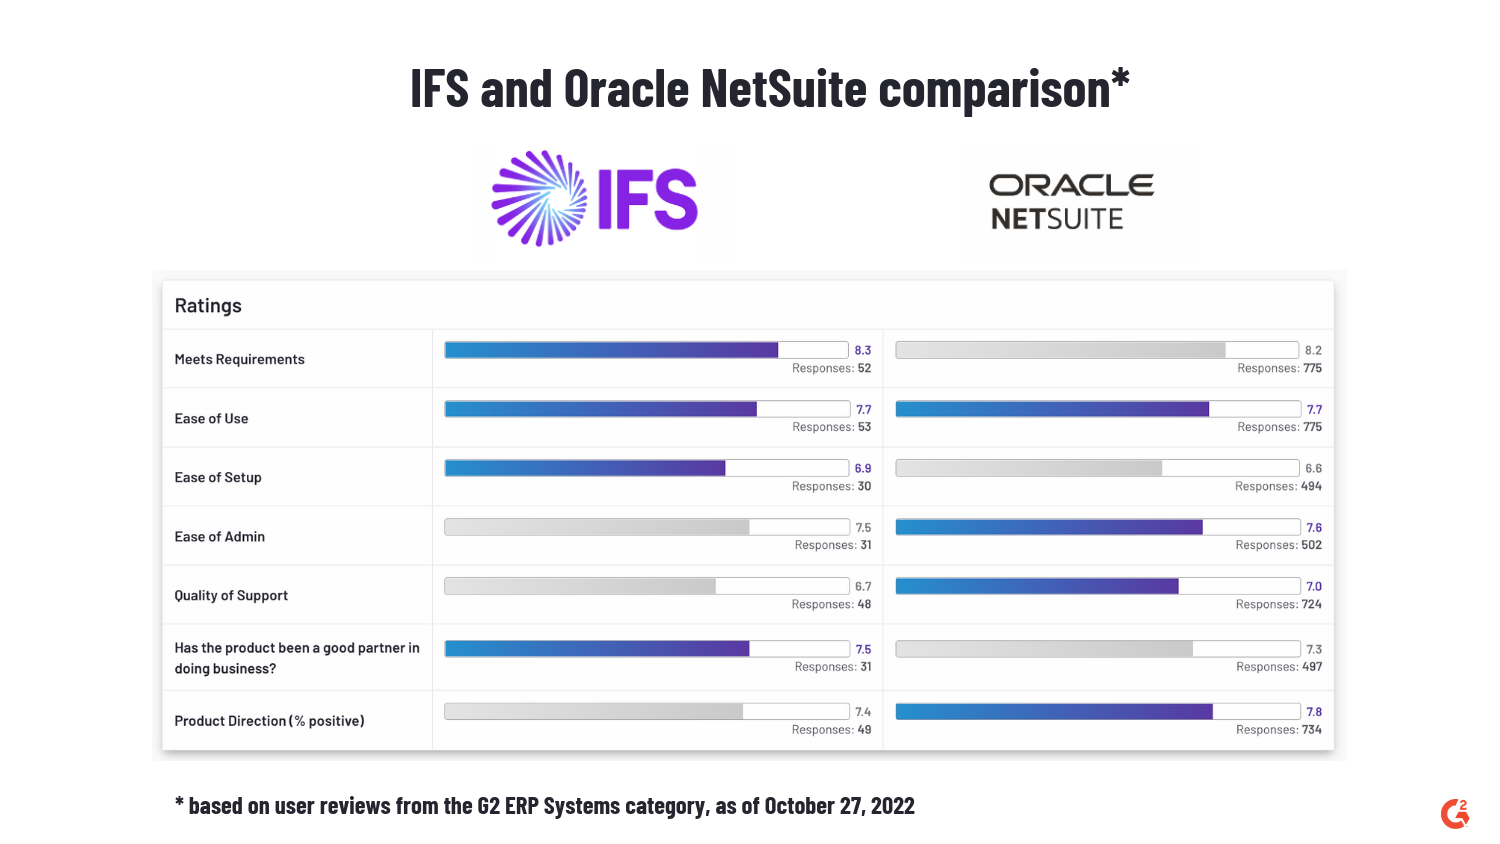 IFS and Oracle NetSuite comparison based on user reviews from the G2 ERP Systems category, as of Oct. 27, 2022